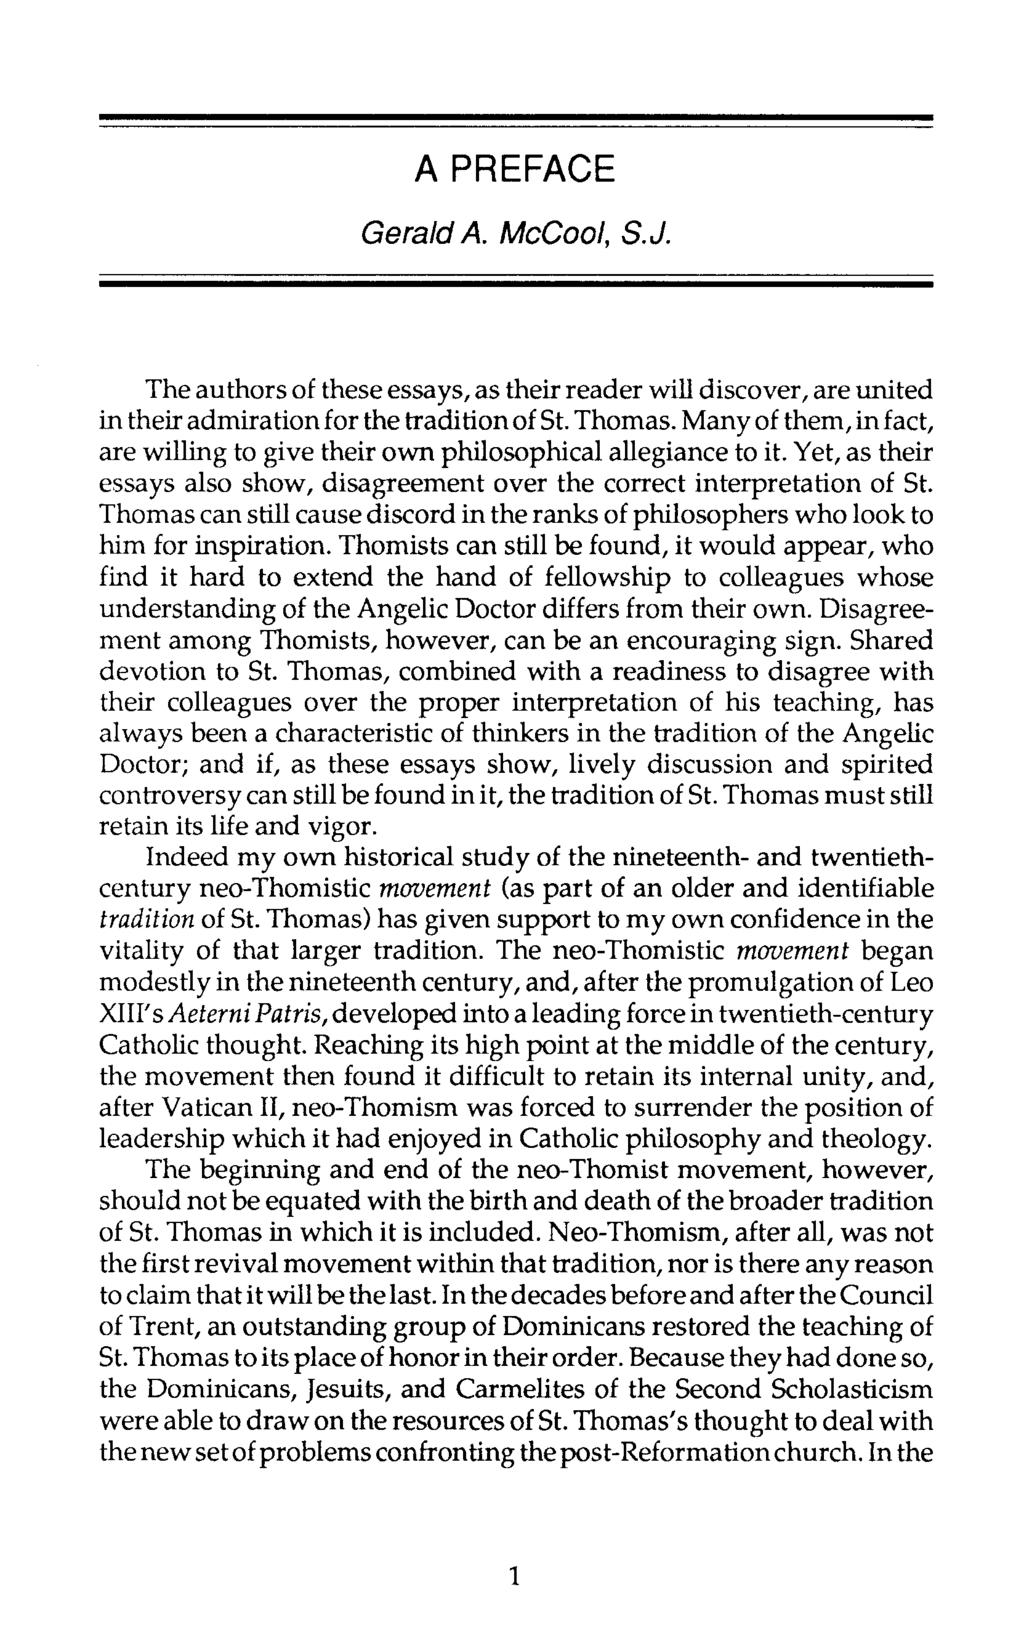 A PREFACE Gerald A. McCool, S.J. The authors of these essays, as their reader will discover, are united in their admiration for the tradition of St. Thomas.